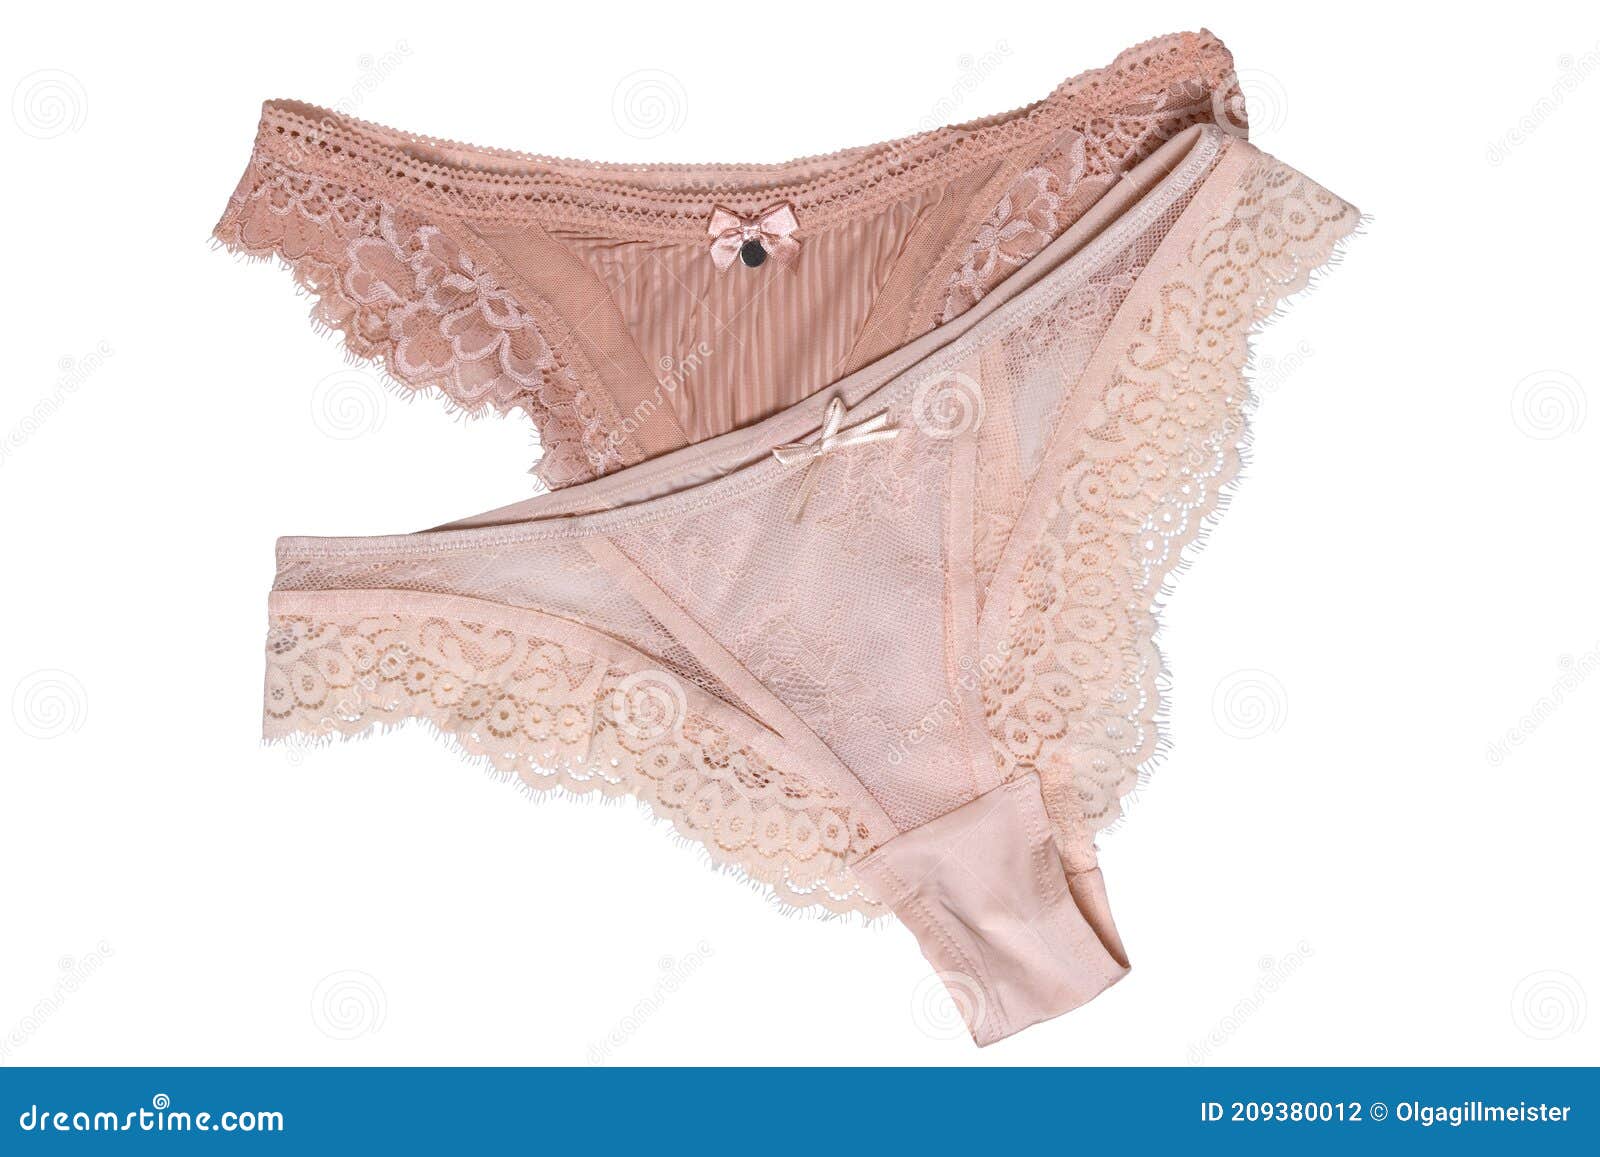 Underwear Woman Isolated. Close-up of Two Luxurious Elegant Beige